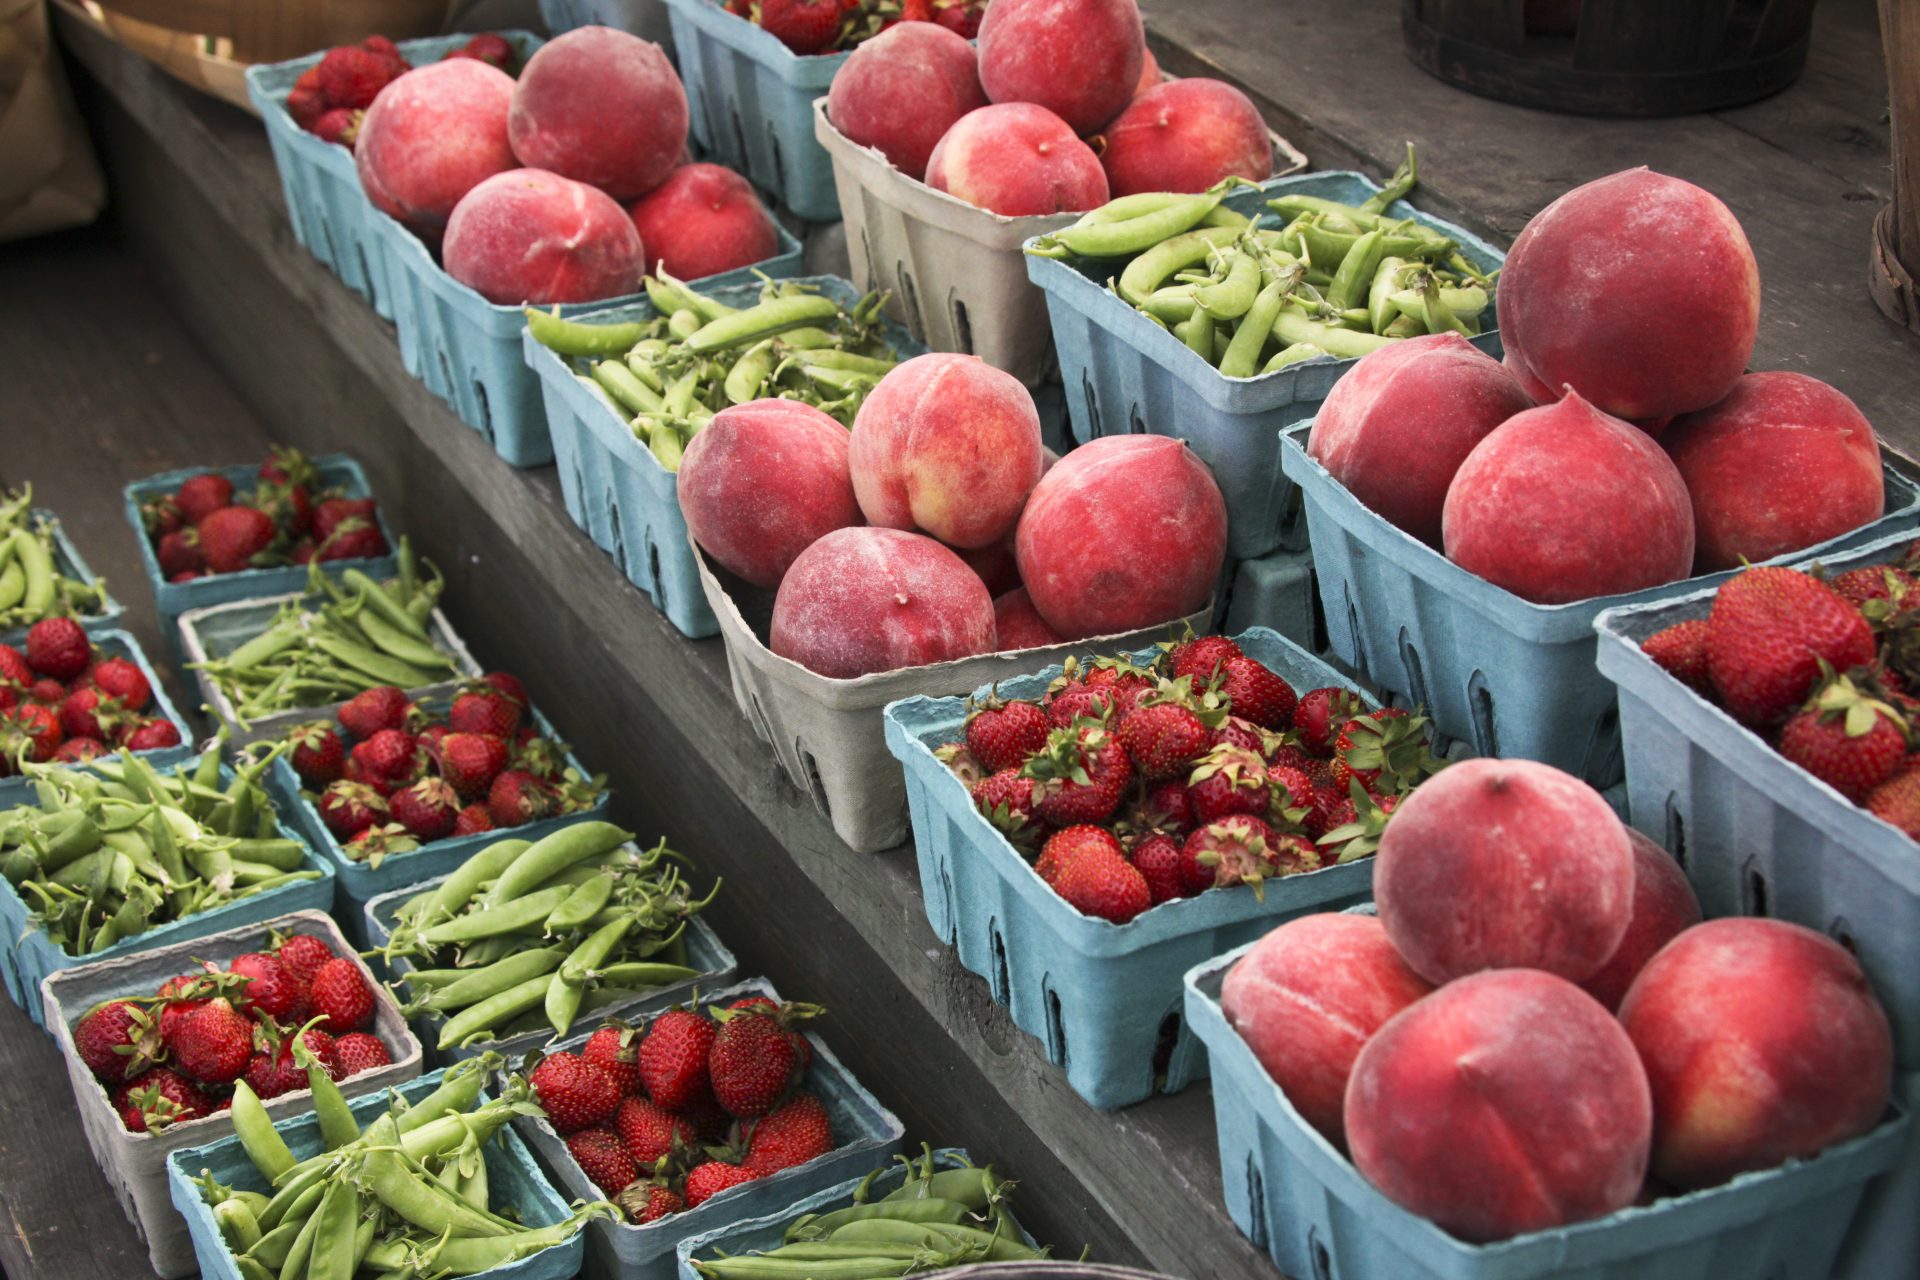 Peaches, strawberries, and snap peas are for sale at a roadside market outside Gettysburg, Pa., Saturday, June 8, 2013.